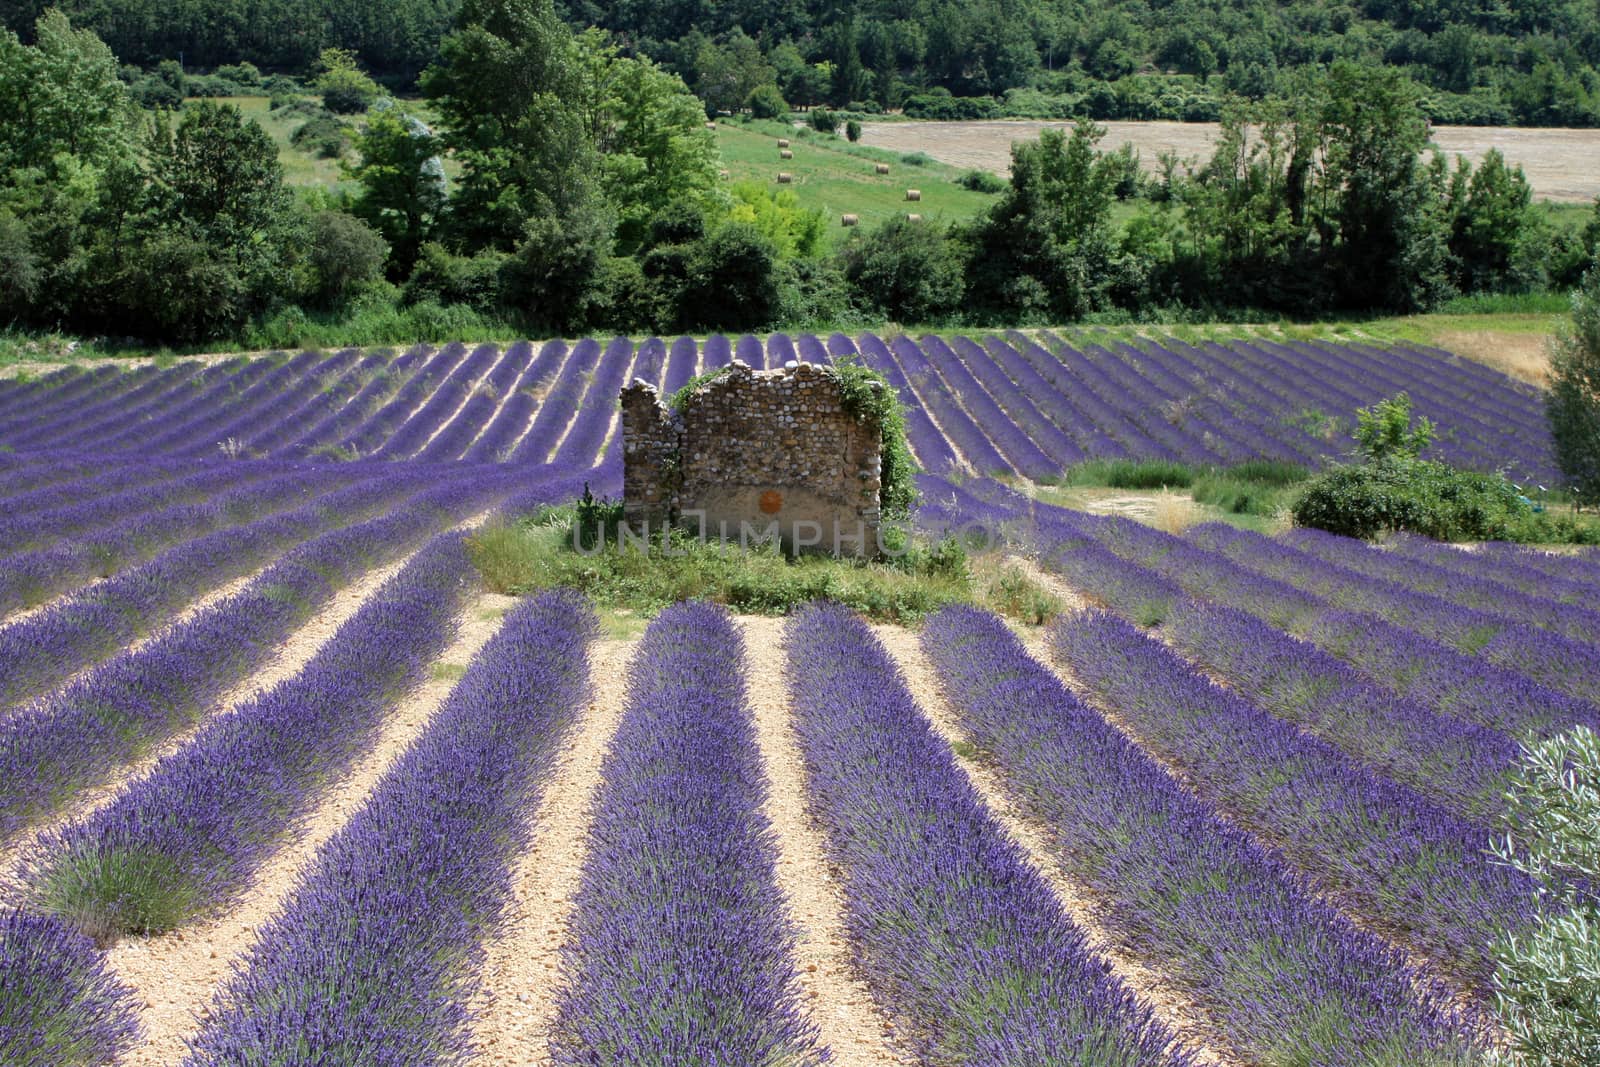 Ruin in the middle of lavender fields by Mag6619